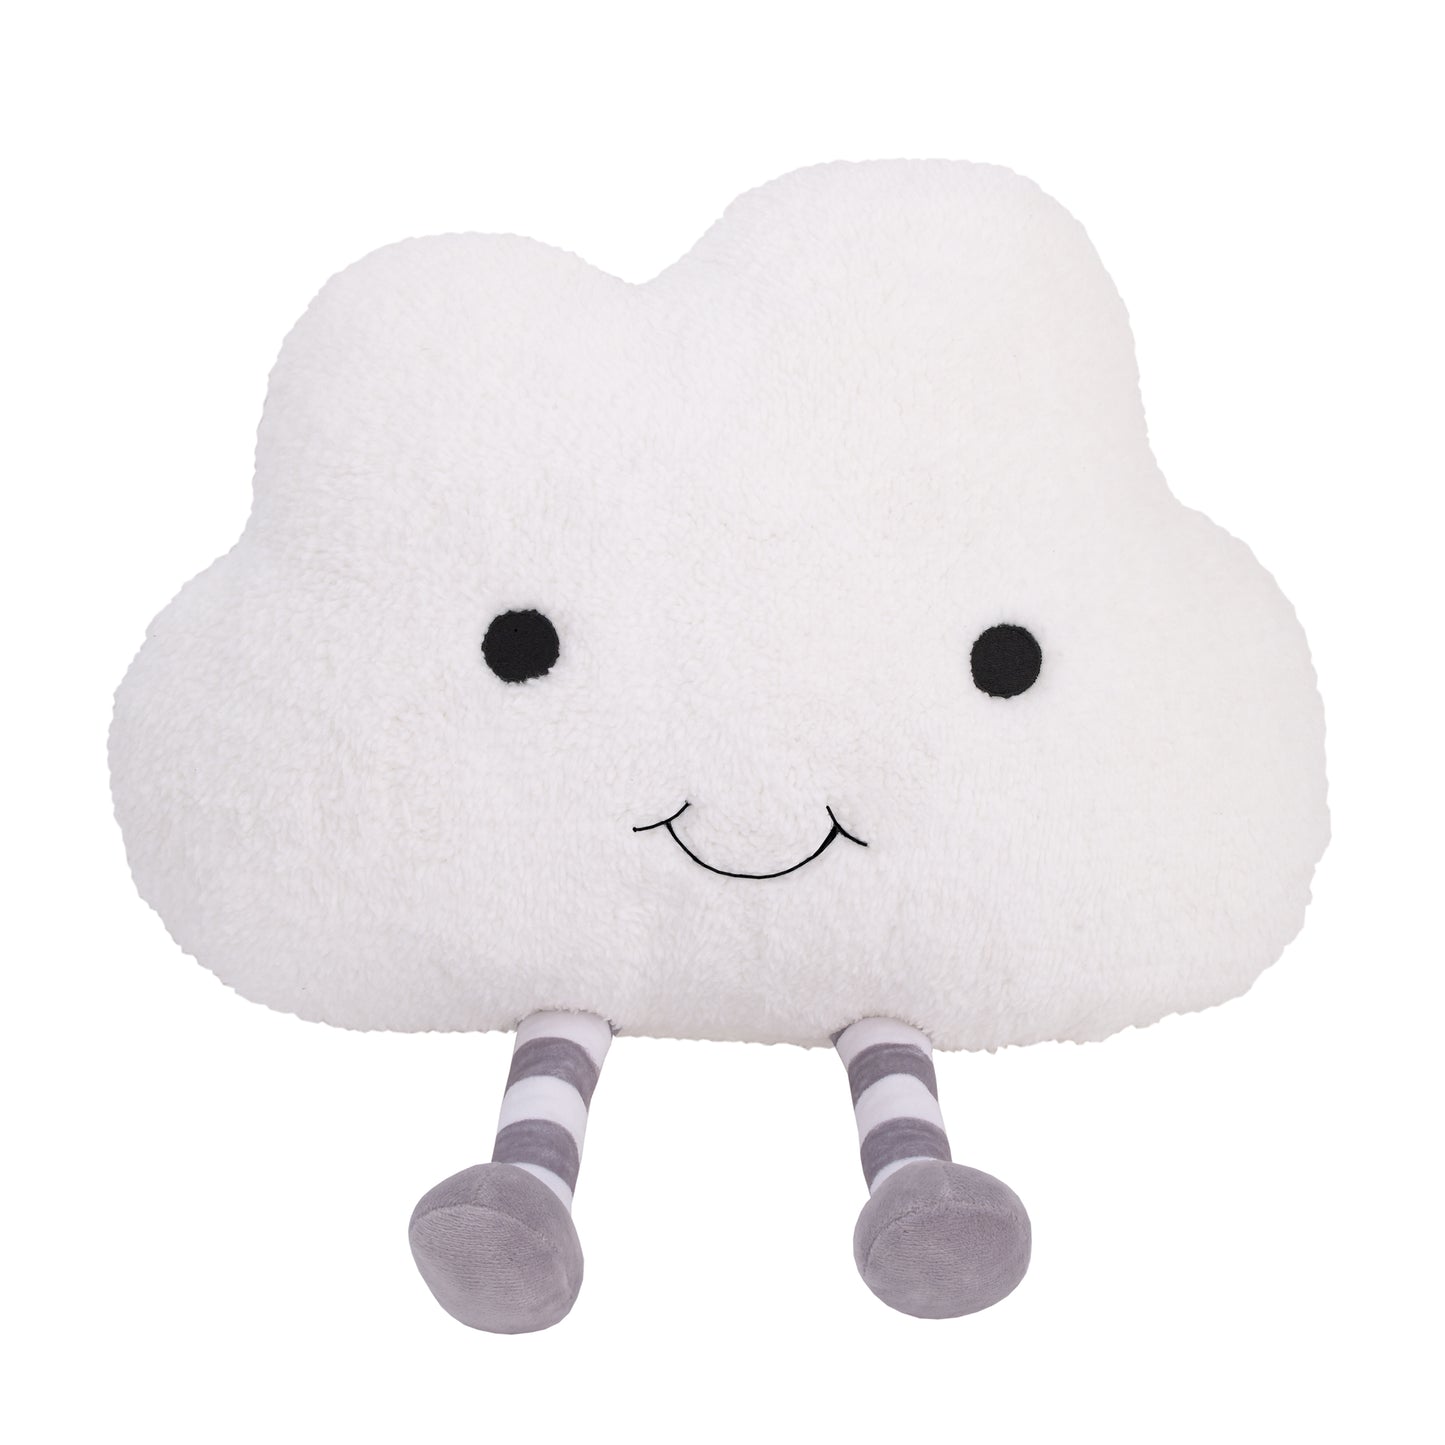 Little Love by NoJo White Cloud with Embroidered Eyes and Smile Grey, White Striped Legs Decorative Shaped Pillow